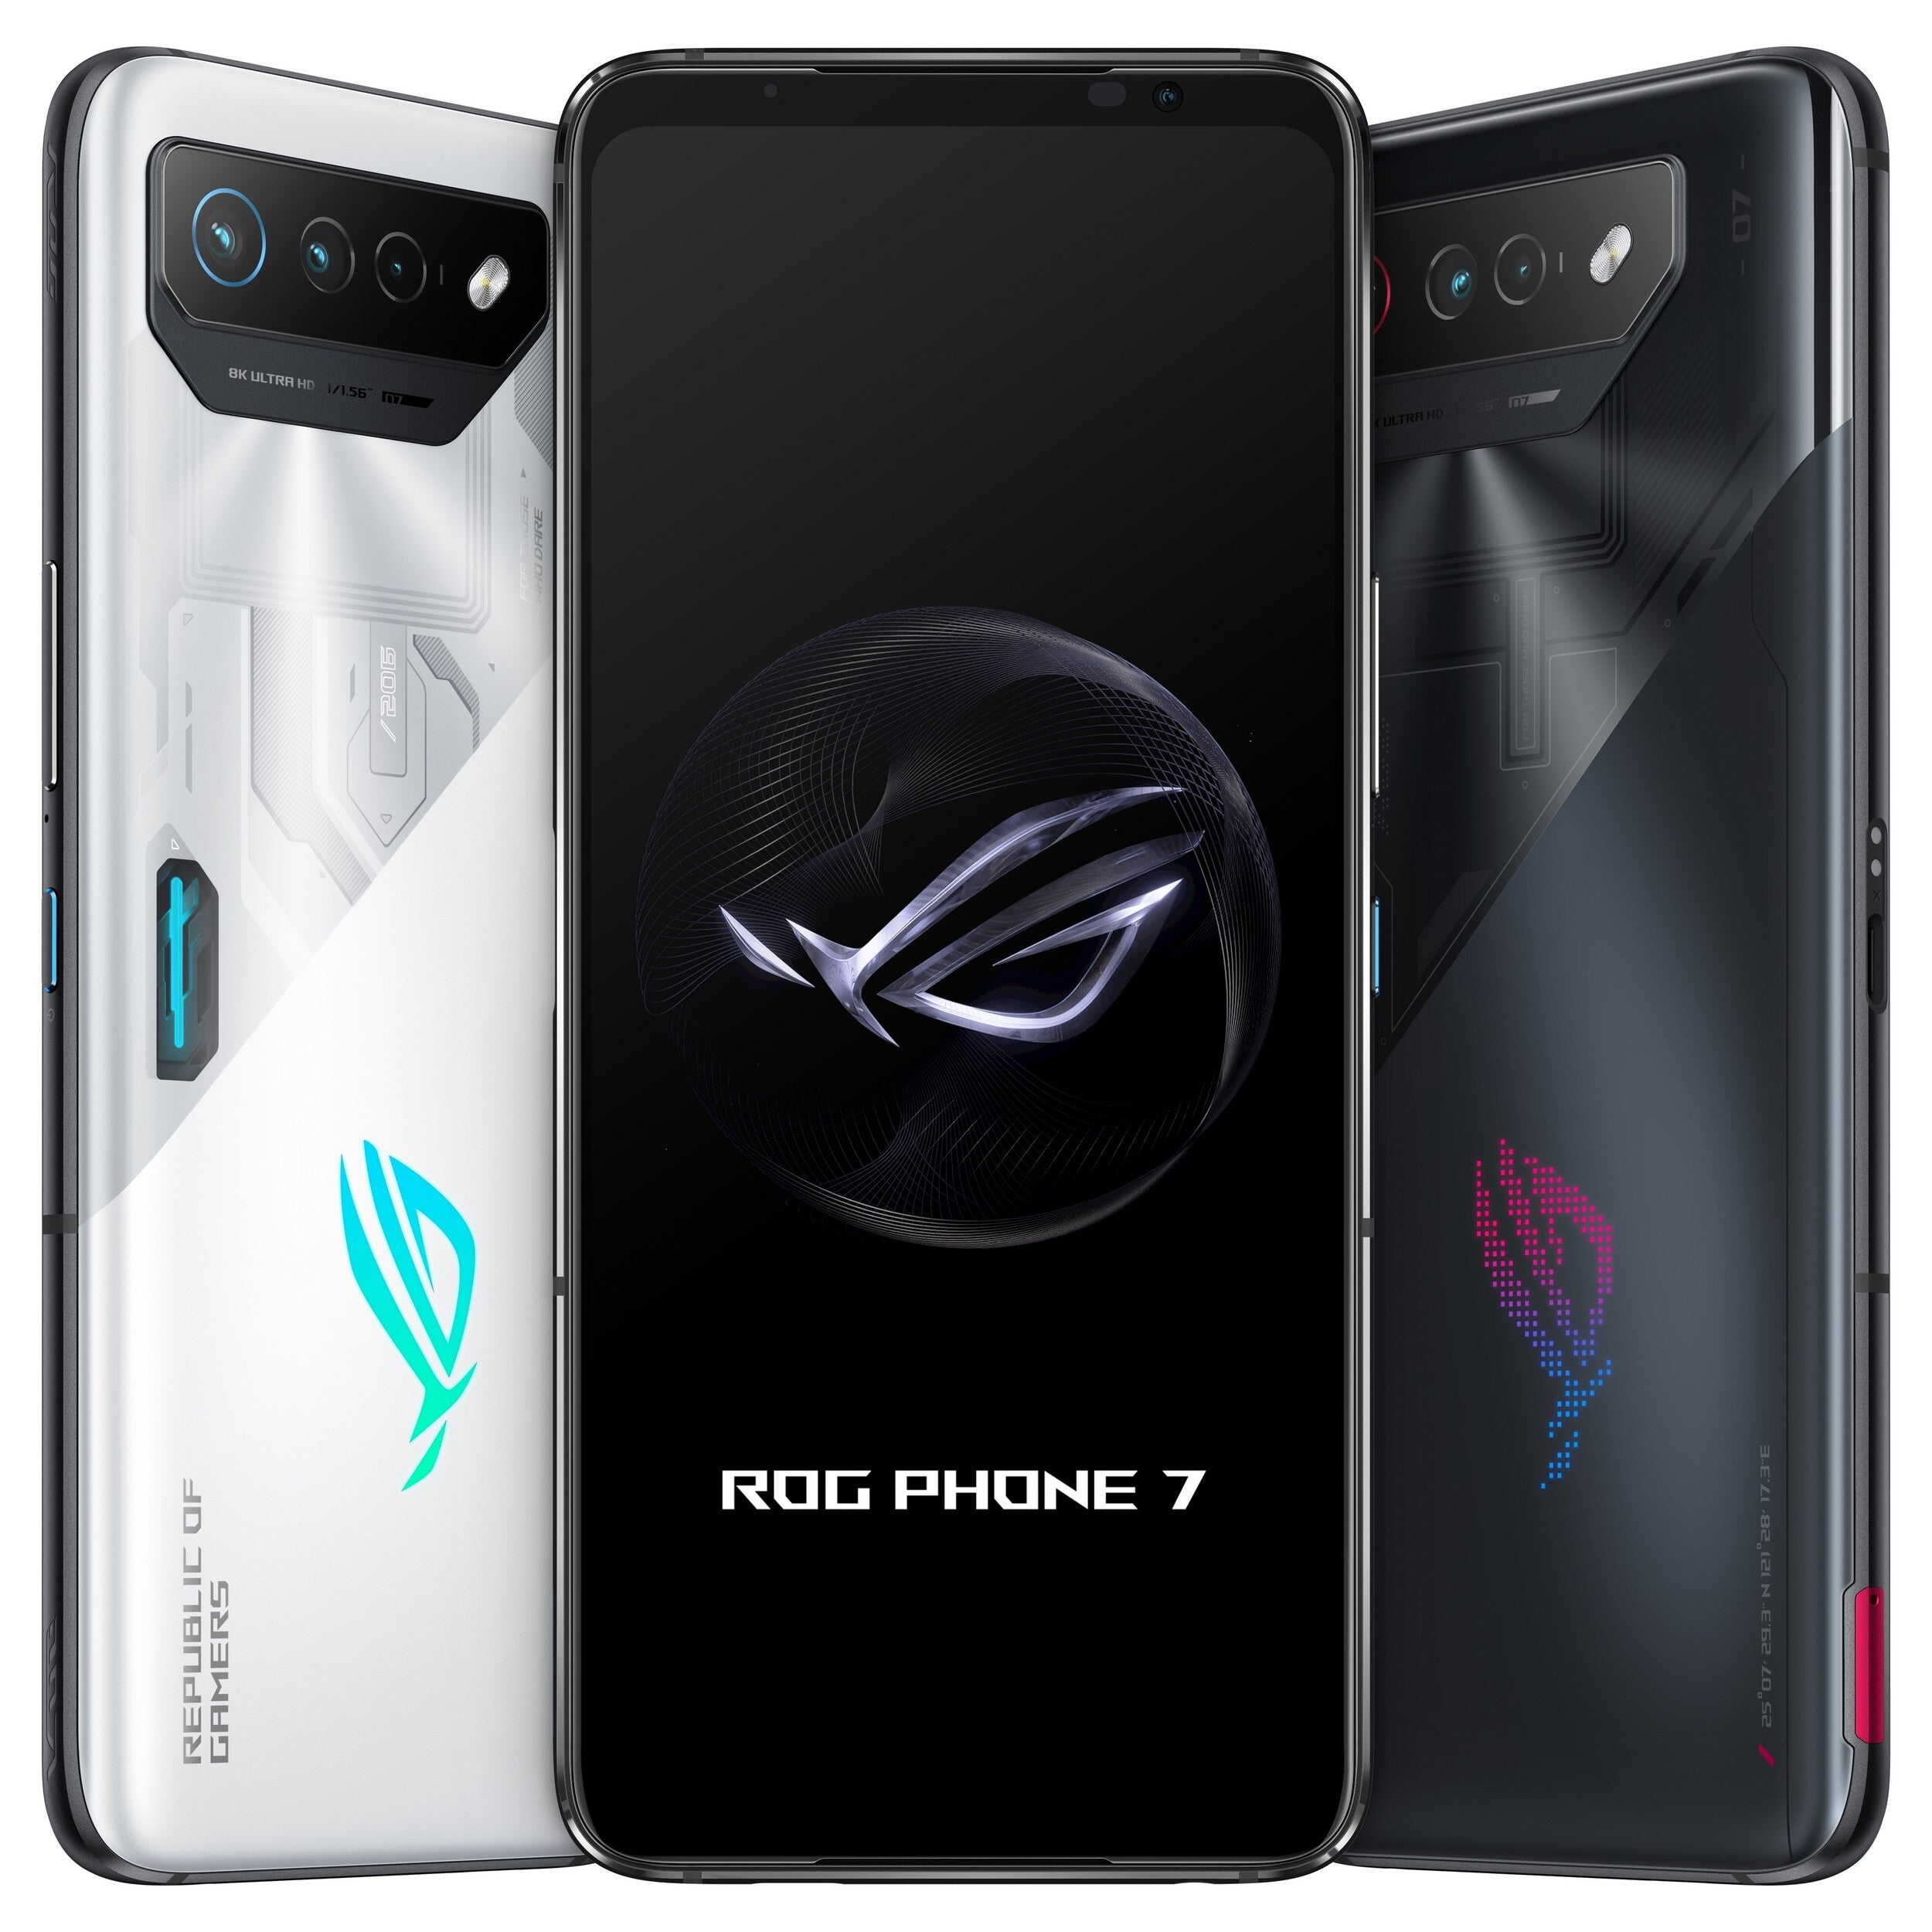 Asus announces the ROG Phone 7 and ROG Phone 7 Ultimate